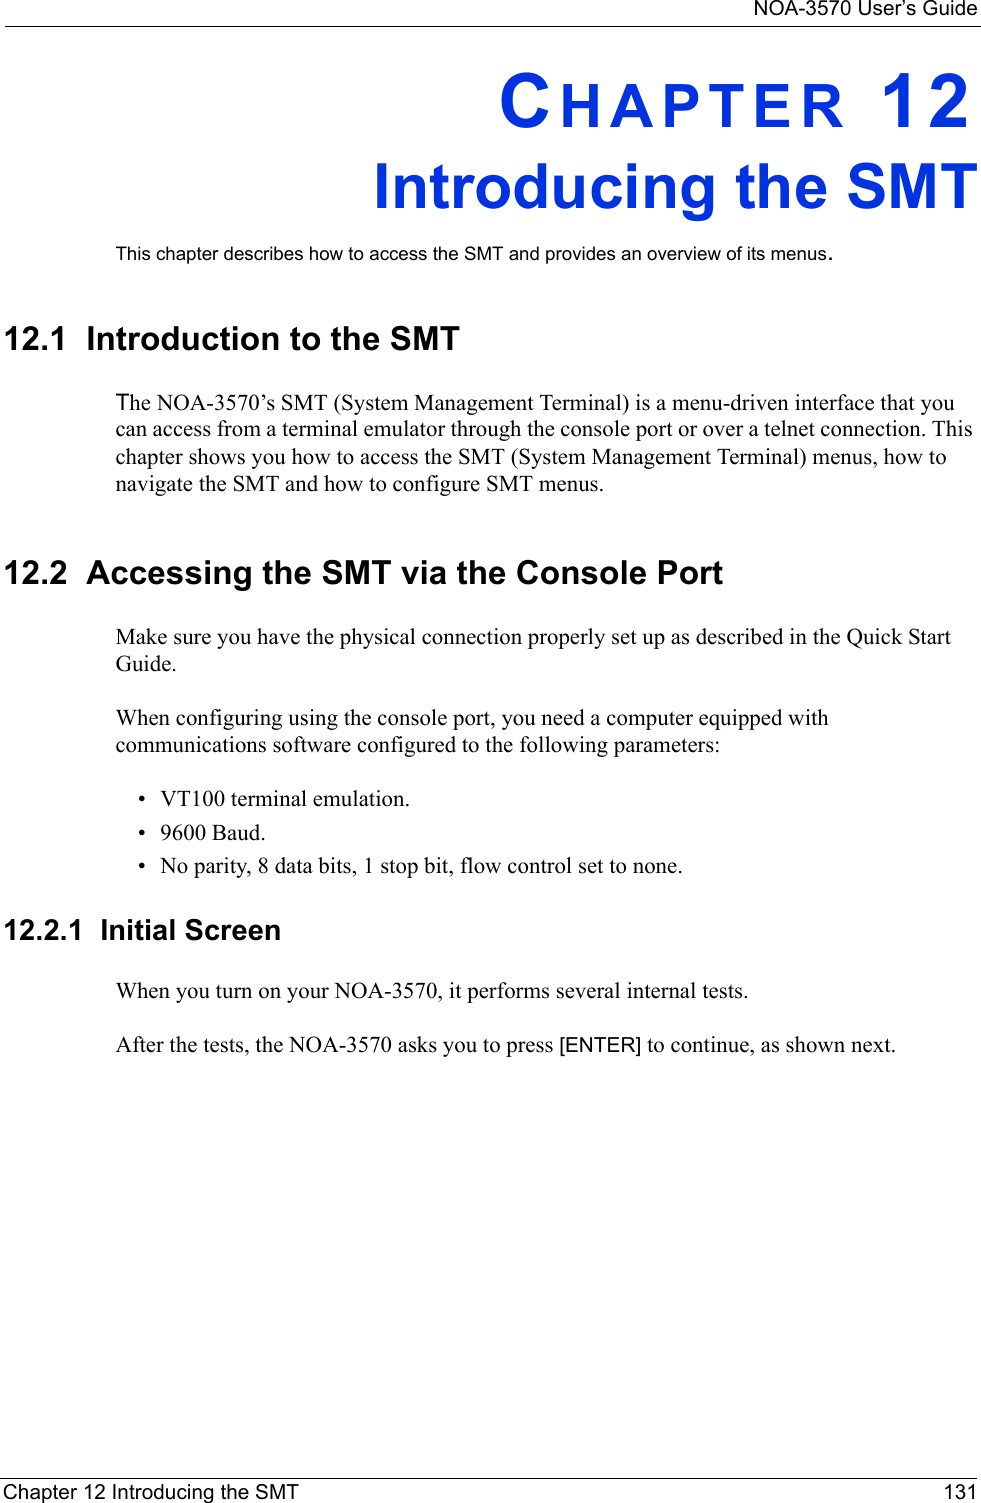 NOA-3570 User’s GuideChapter 12 Introducing the SMT 131CHAPTER 12Introducing the SMTThis chapter describes how to access the SMT and provides an overview of its menus.12.1  Introduction to the SMTThe NOA-3570’s SMT (System Management Terminal) is a menu-driven interface that you can access from a terminal emulator through the console port or over a telnet connection. This chapter shows you how to access the SMT (System Management Terminal) menus, how to navigate the SMT and how to configure SMT menus.12.2  Accessing the SMT via the Console PortMake sure you have the physical connection properly set up as described in the Quick Start Guide. When configuring using the console port, you need a computer equipped with communications software configured to the following parameters:• VT100 terminal emulation.• 9600 Baud.• No parity, 8 data bits, 1 stop bit, flow control set to none.12.2.1  Initial ScreenWhen you turn on your NOA-3570, it performs several internal tests. After the tests, the NOA-3570 asks you to press [ENTER] to continue, as shown next.